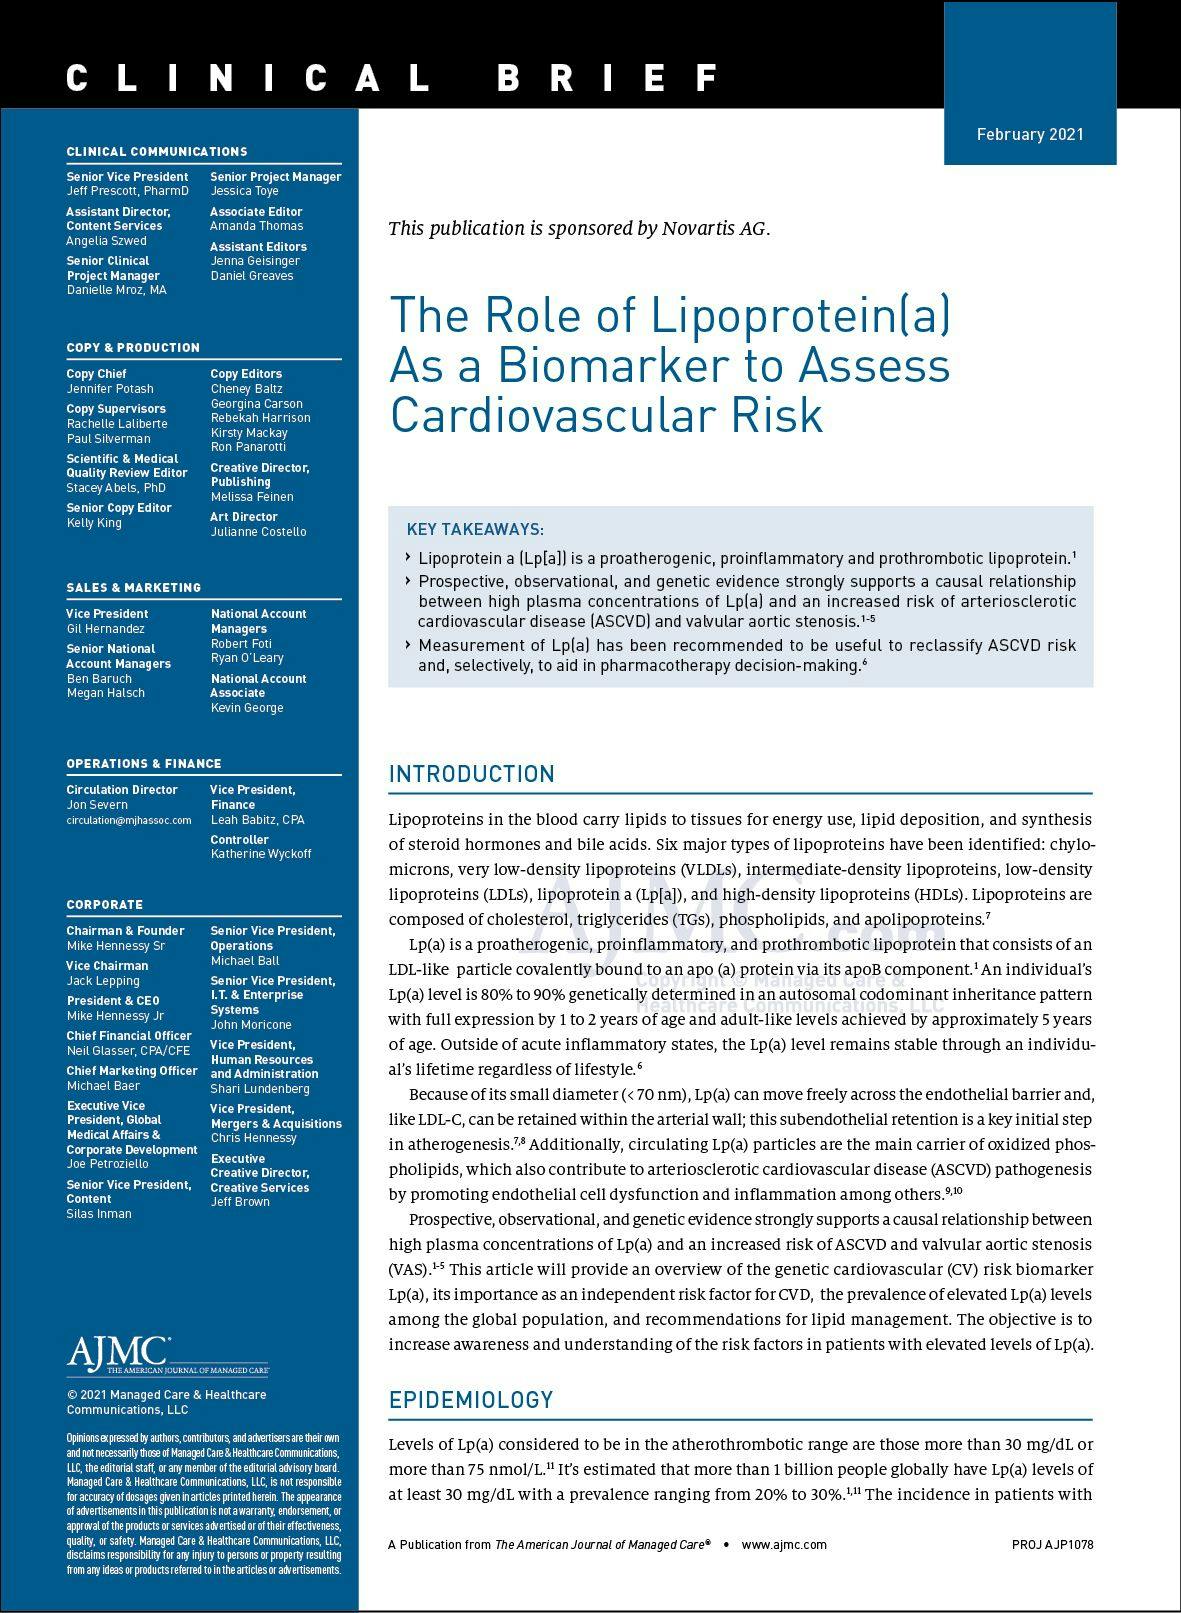 The Role of Lipoprotein(a) As a Biomarker to Assess Cardiovascular Risk